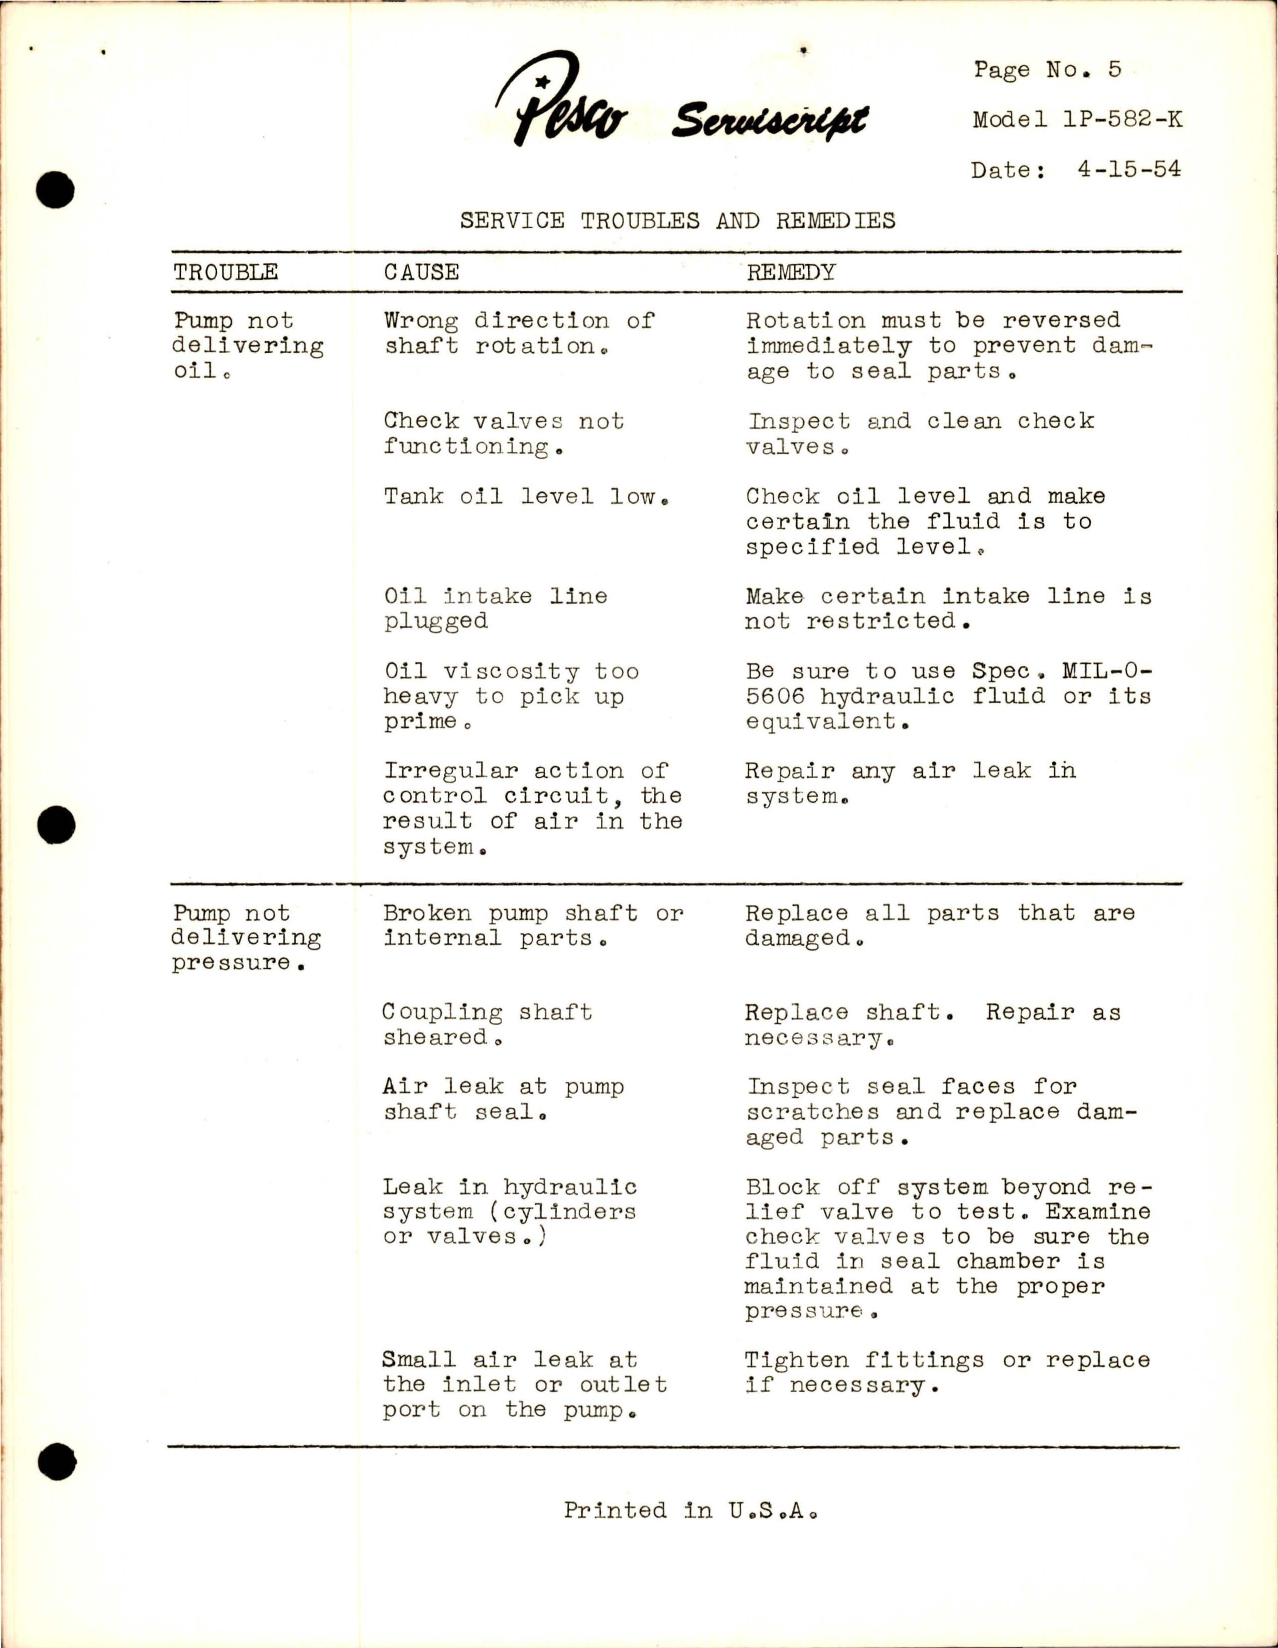 Sample page 5 from AirCorps Library document: Maintenance, Overhaul Instructions, and Test Procedures with Parts List for Hydraulic Gear Pump - Model 1P-582-K 